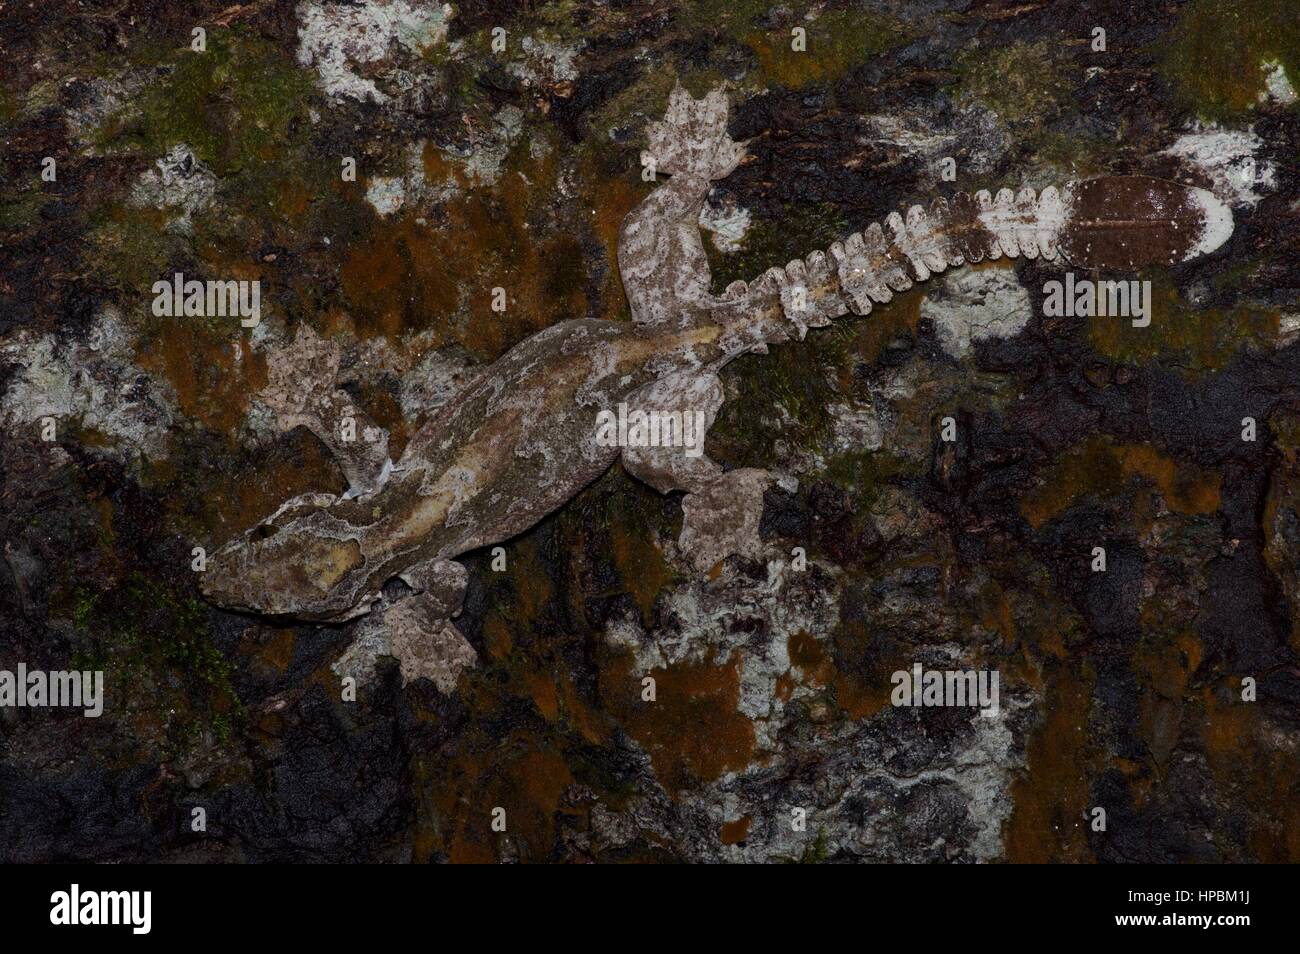 A Kuhl's Flying Gecko (Ptychozoon kuhli) camouflaged on a log in the Malaysian rainforest at night Stock Photo